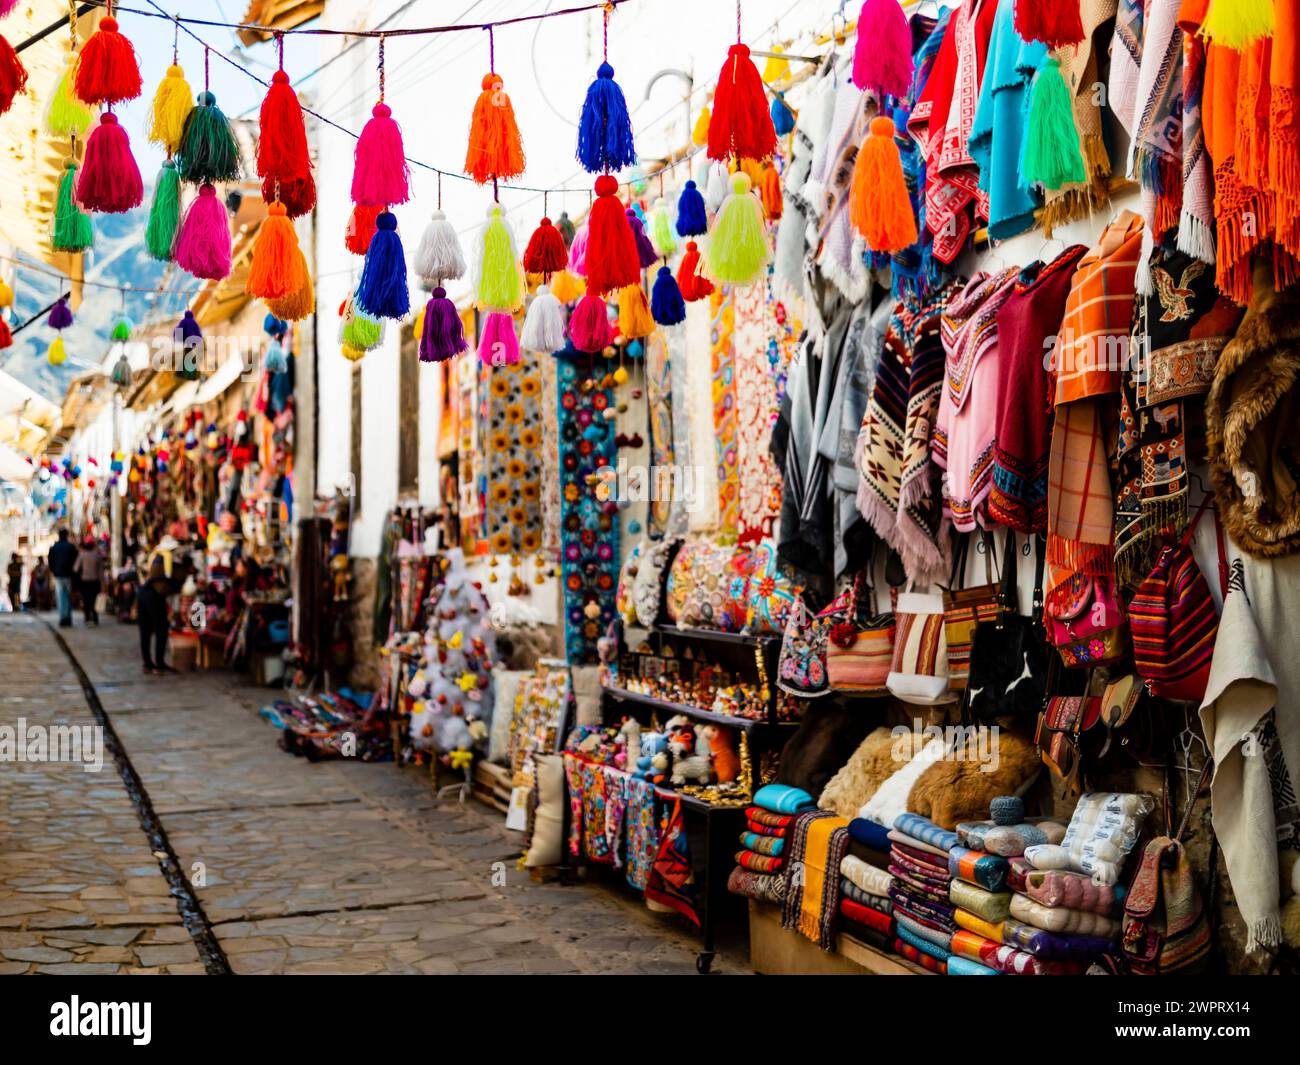 Colorful alley with handmade souvenirs in traditional Pisac market, Sacred valley of Inca, Cusco region, Peru Stock Photo